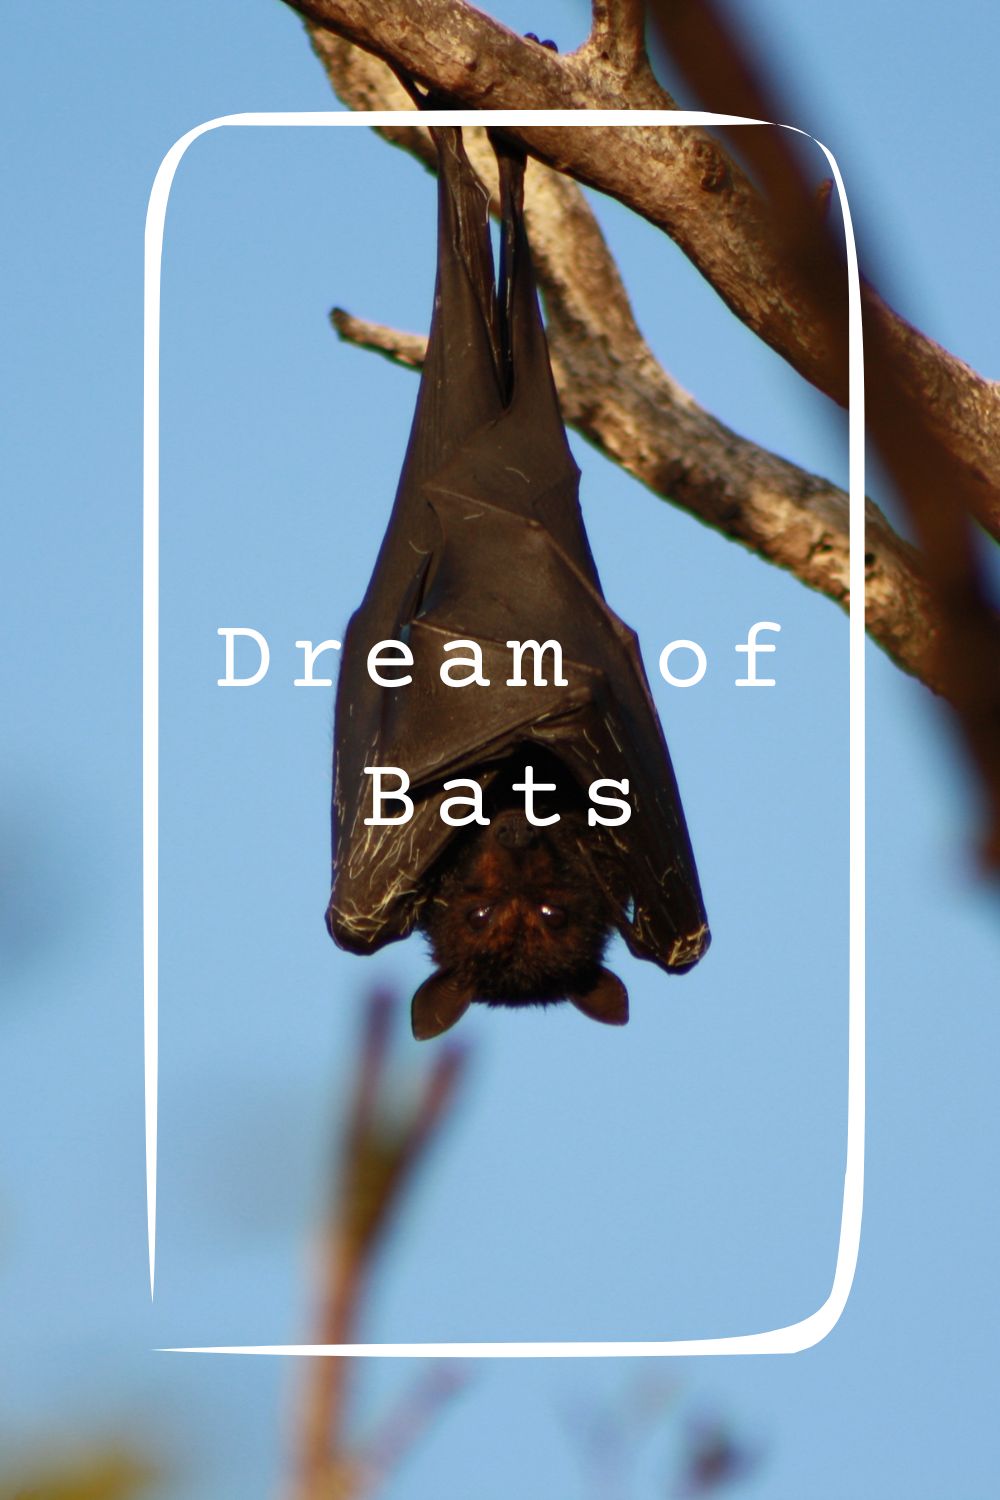 15 Dream of Bats Meanings4